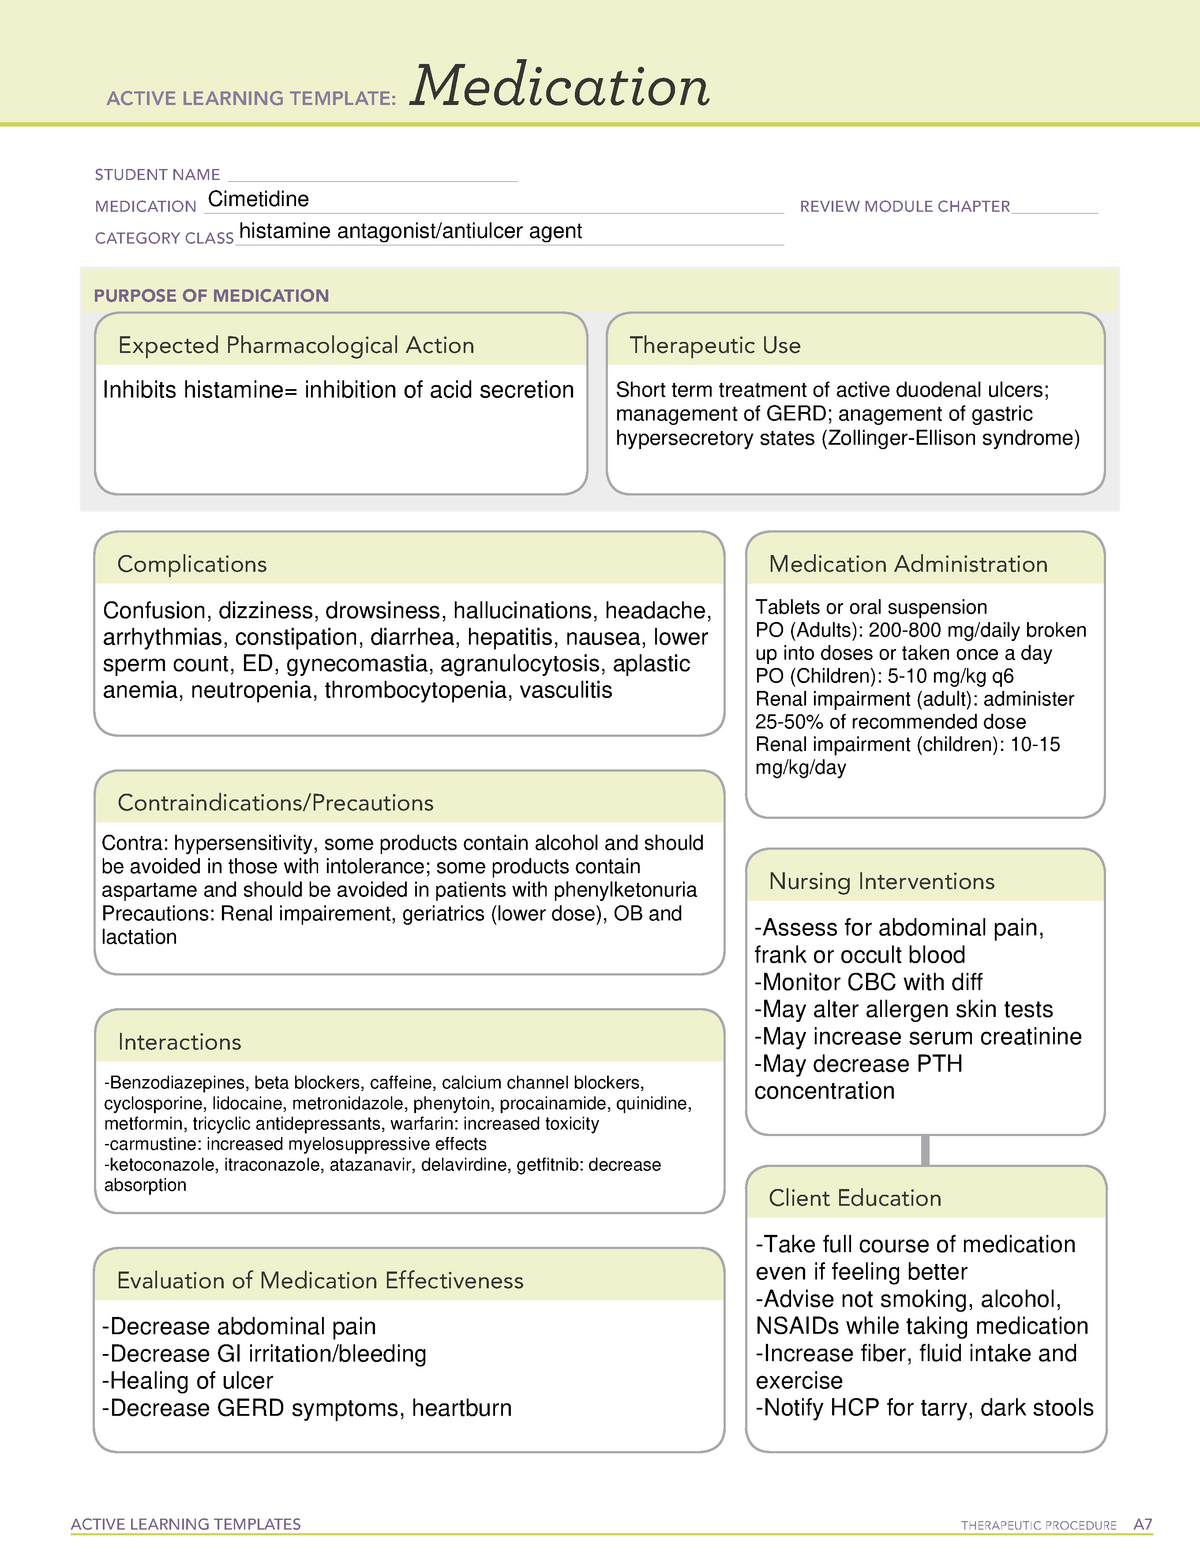 Cimetidine Medication Template ACTIVE LEARNING TEMPLATES THERAPEUTIC